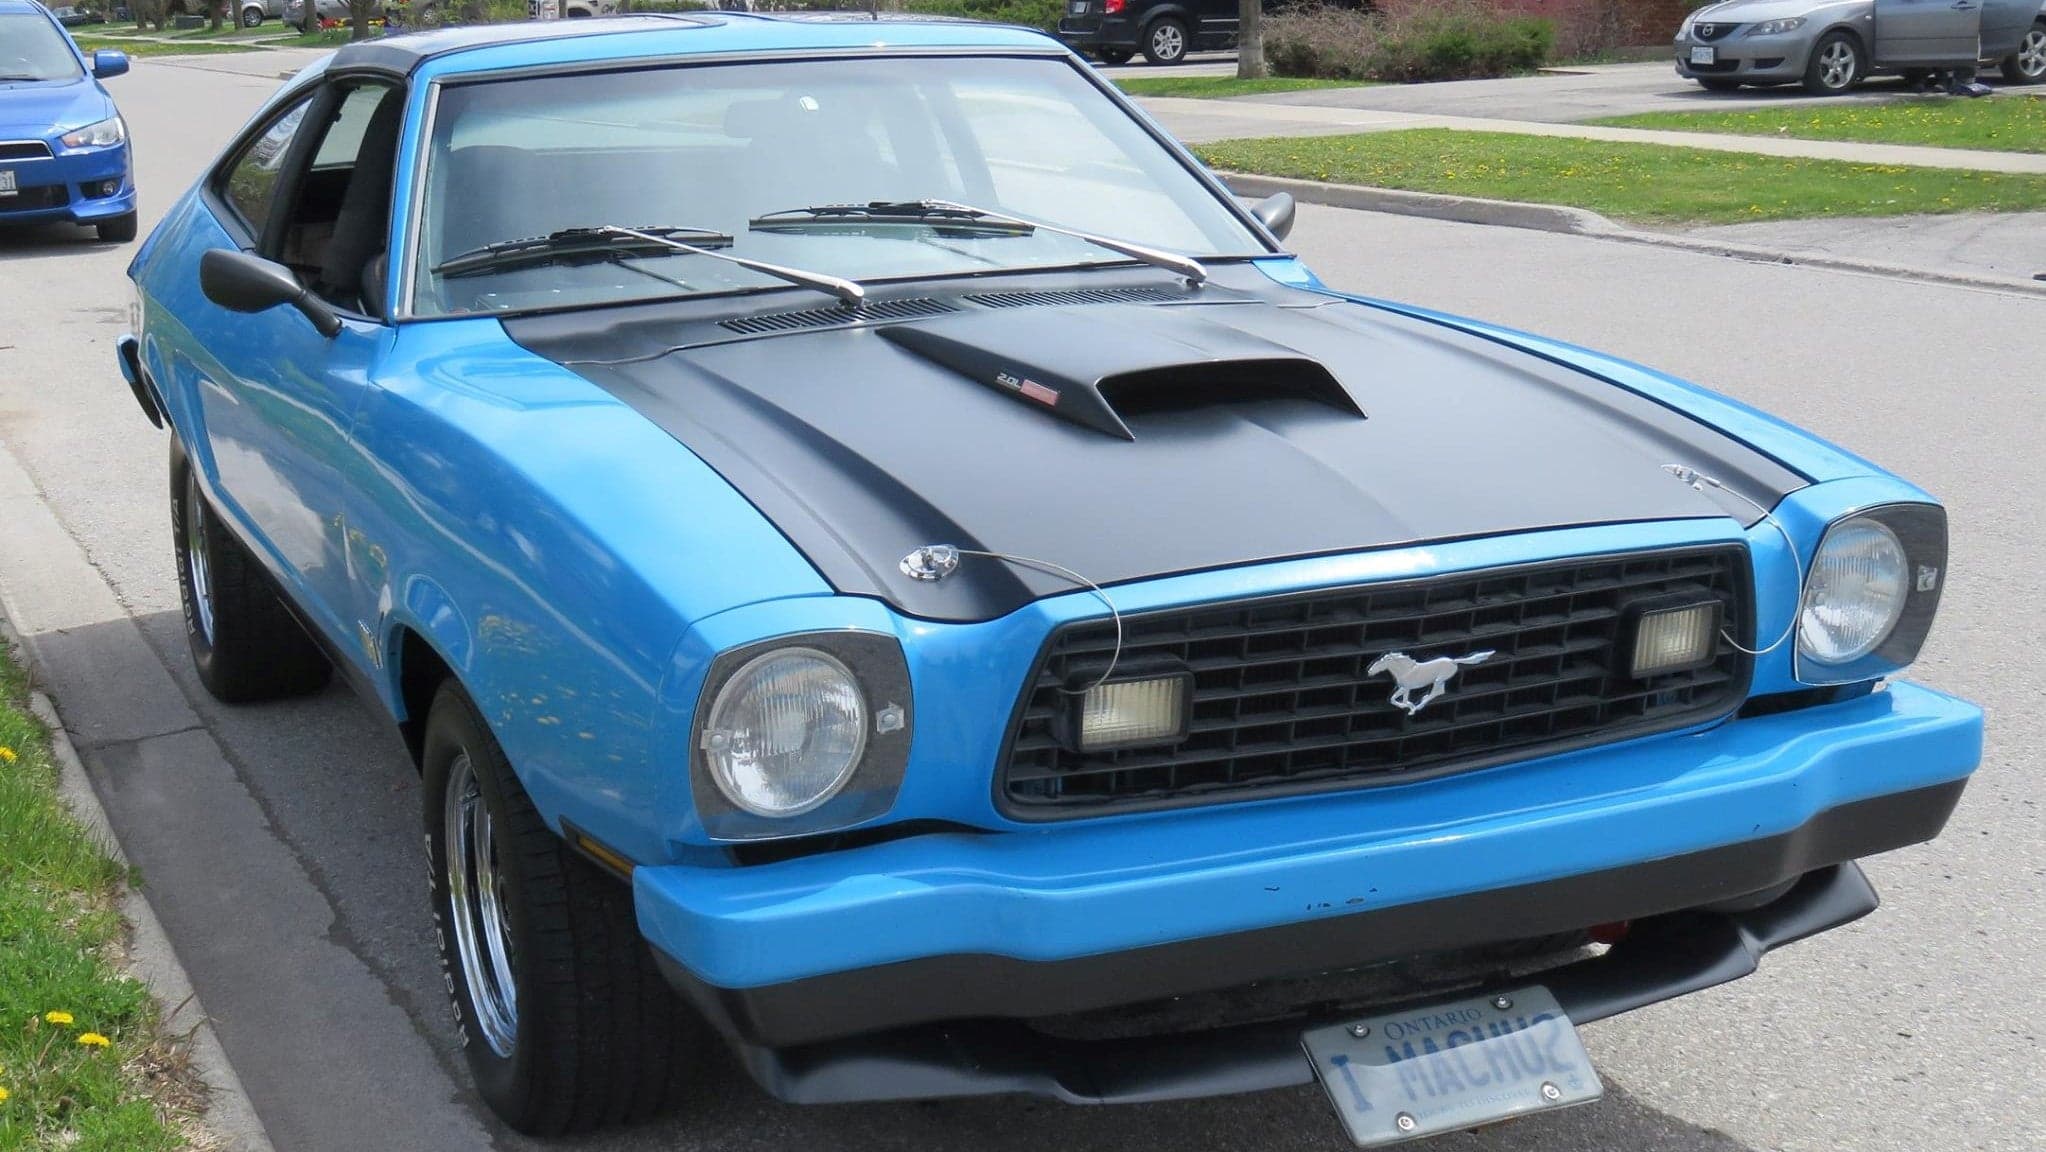 This Ford Mustang II Mach 1 Has a Turbo Nissan Silvia Engine